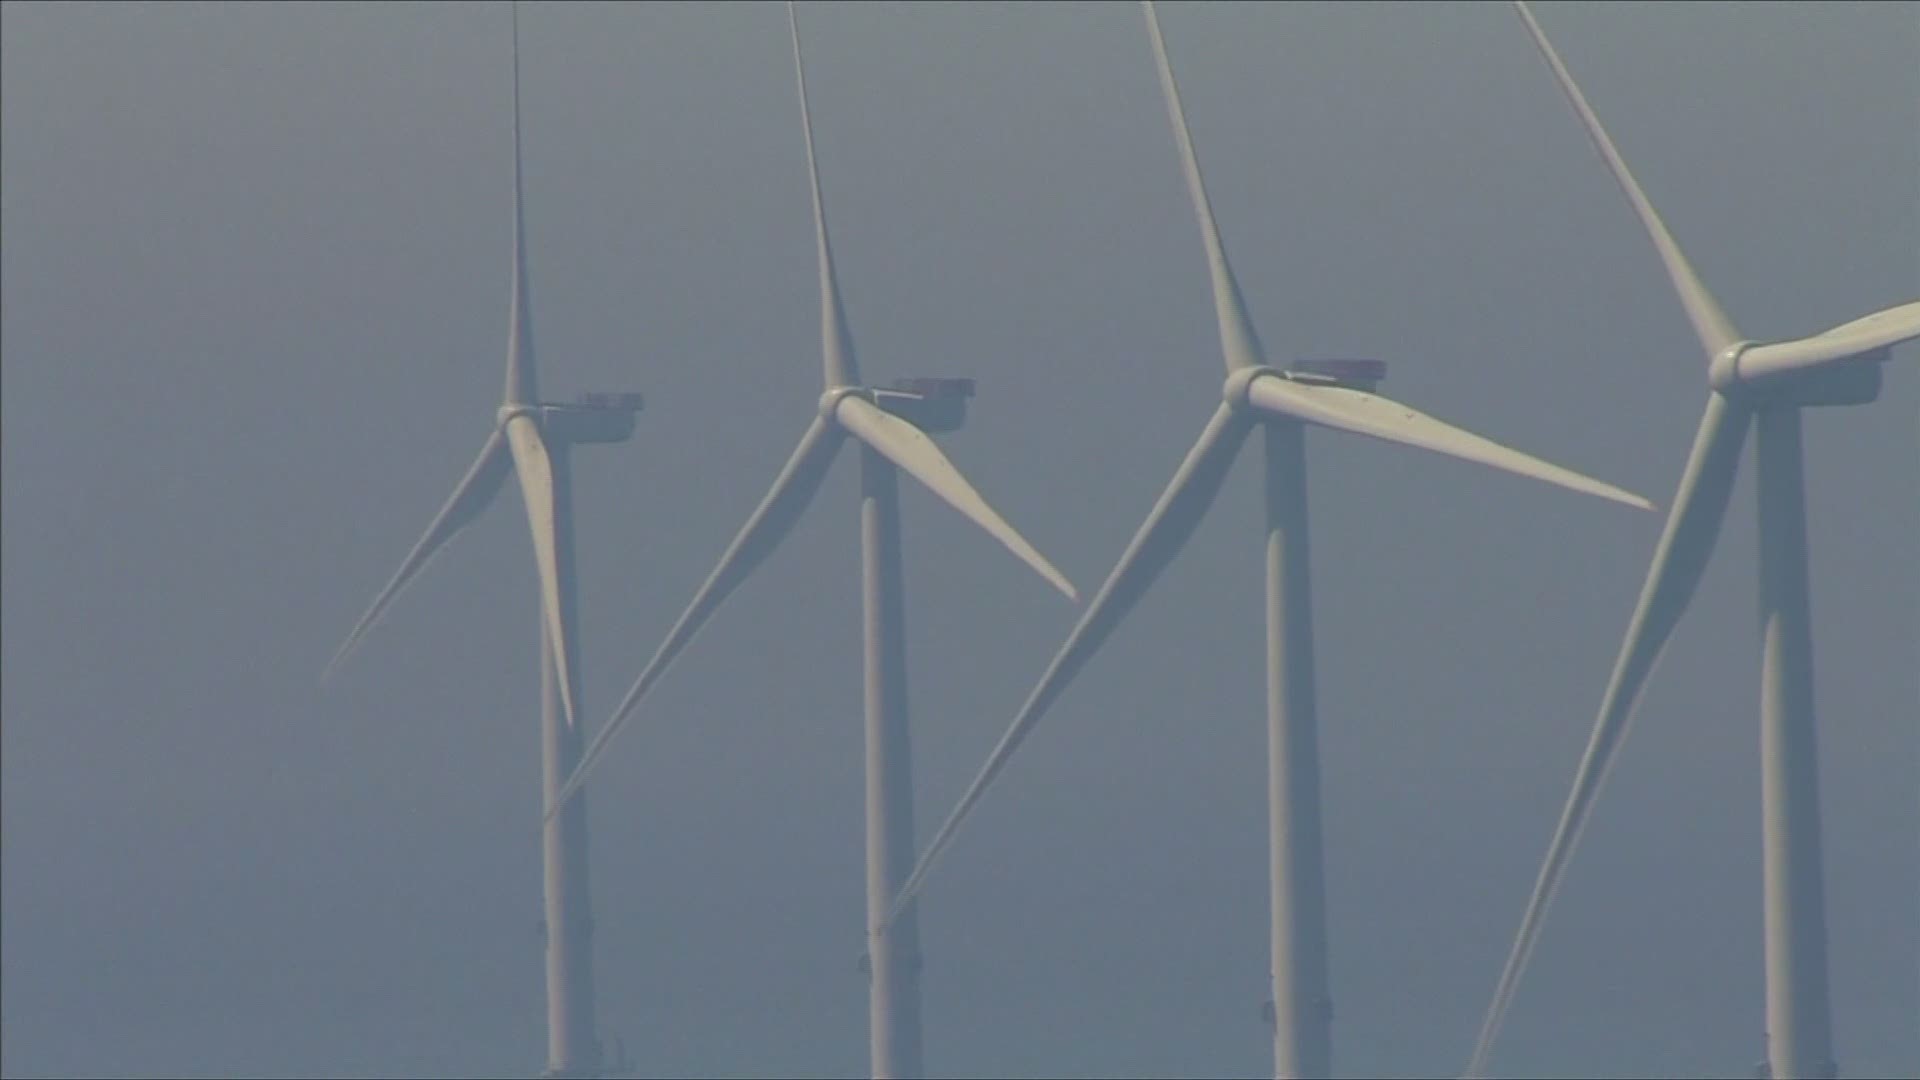 While Gov. Mills says she is committed to working with fishermen to make it work, many say that the turbines would eat up too large of an area off the coast of Maine